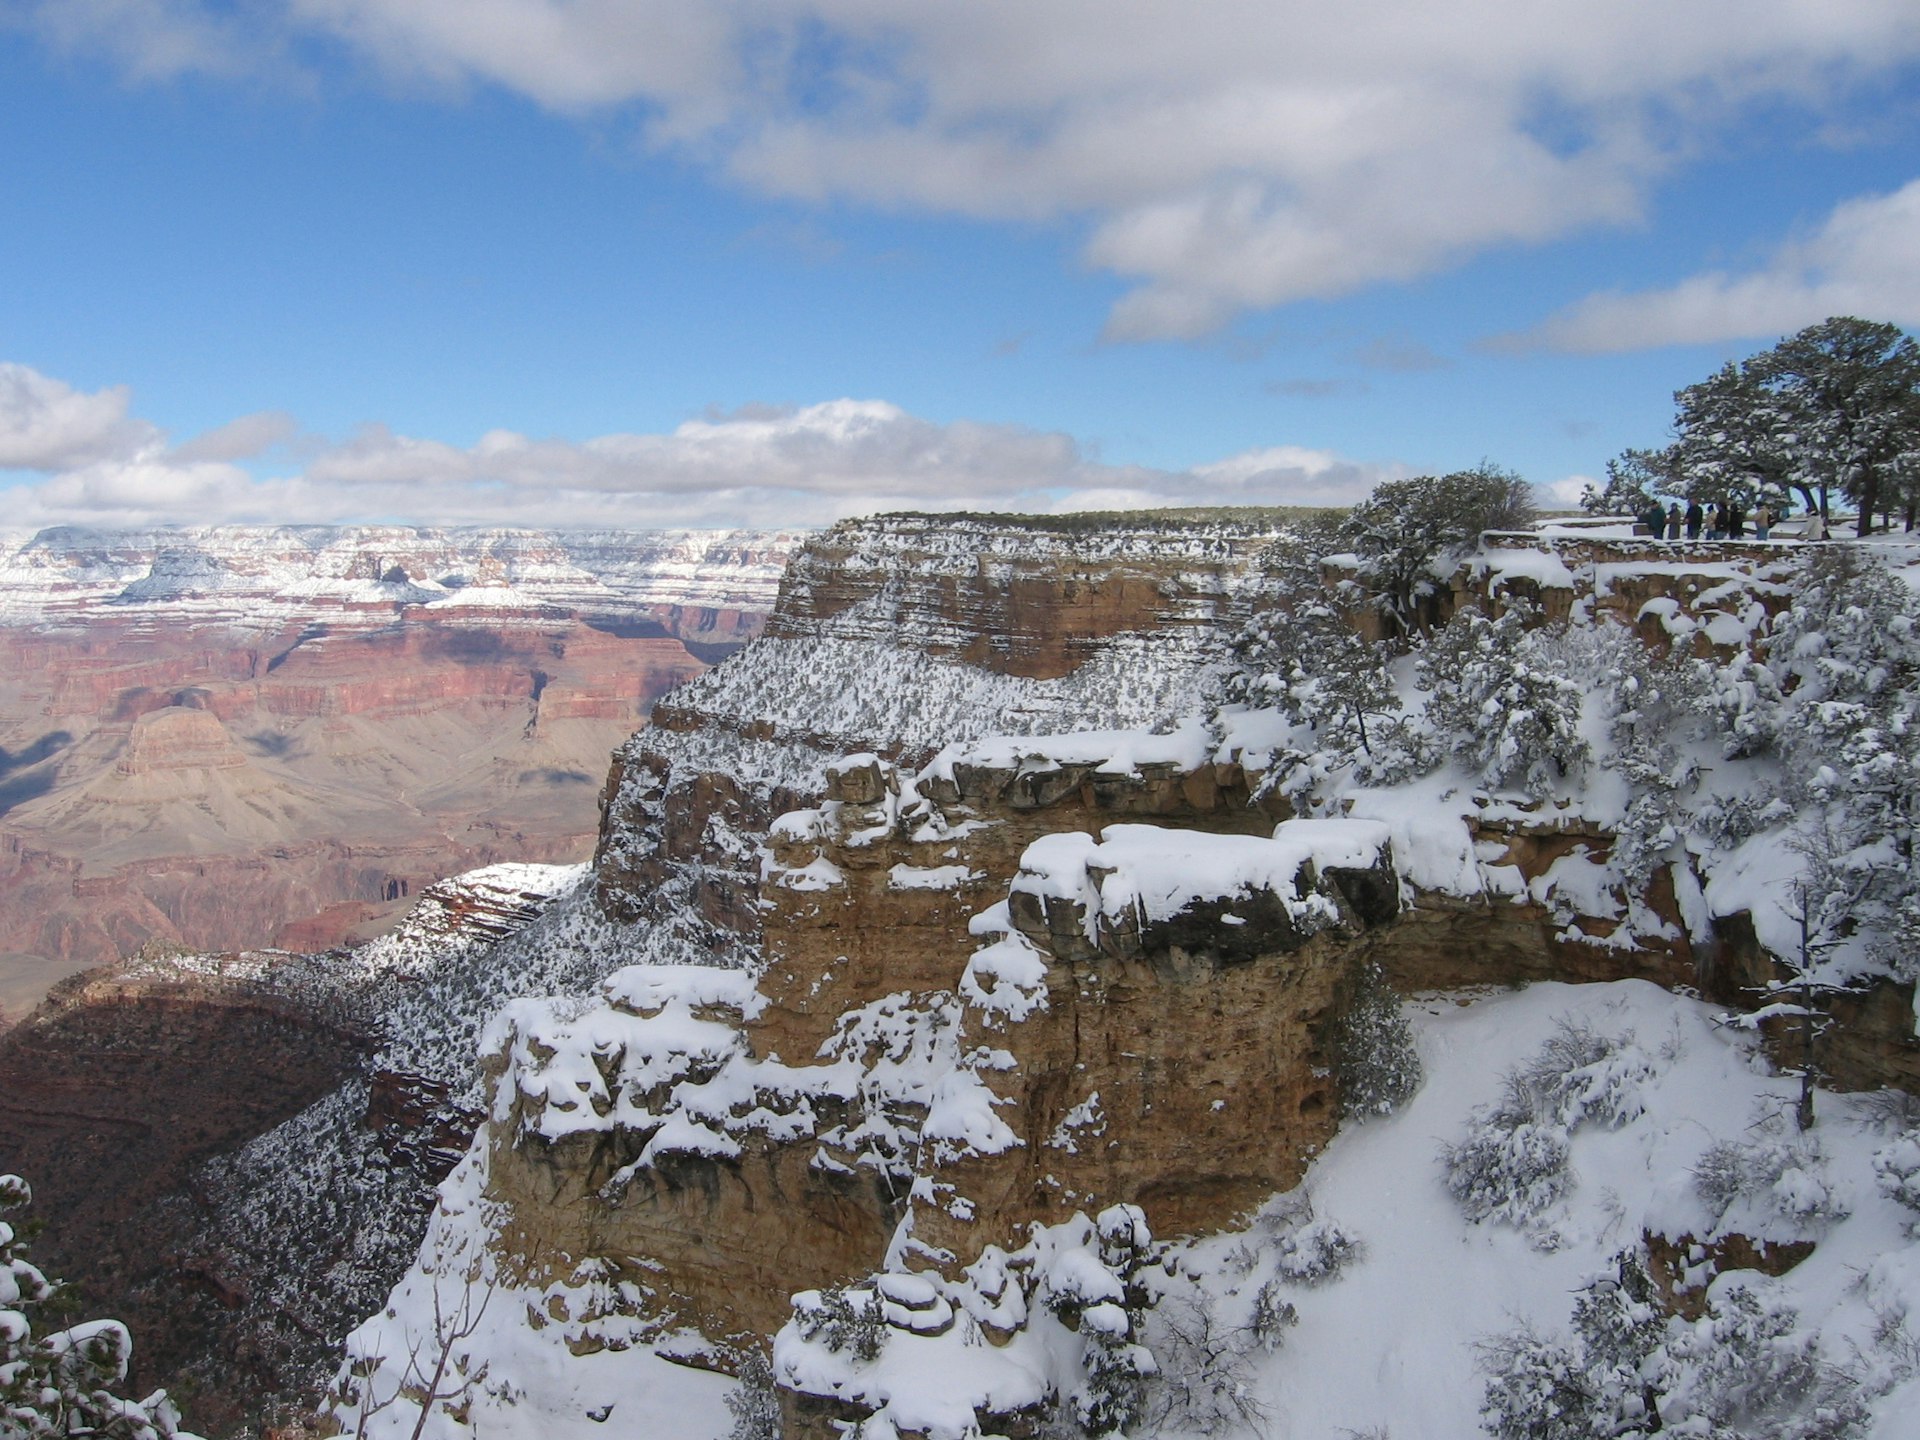 BTgrand-canyon-a-different-perspective-07201406-220458.jpg